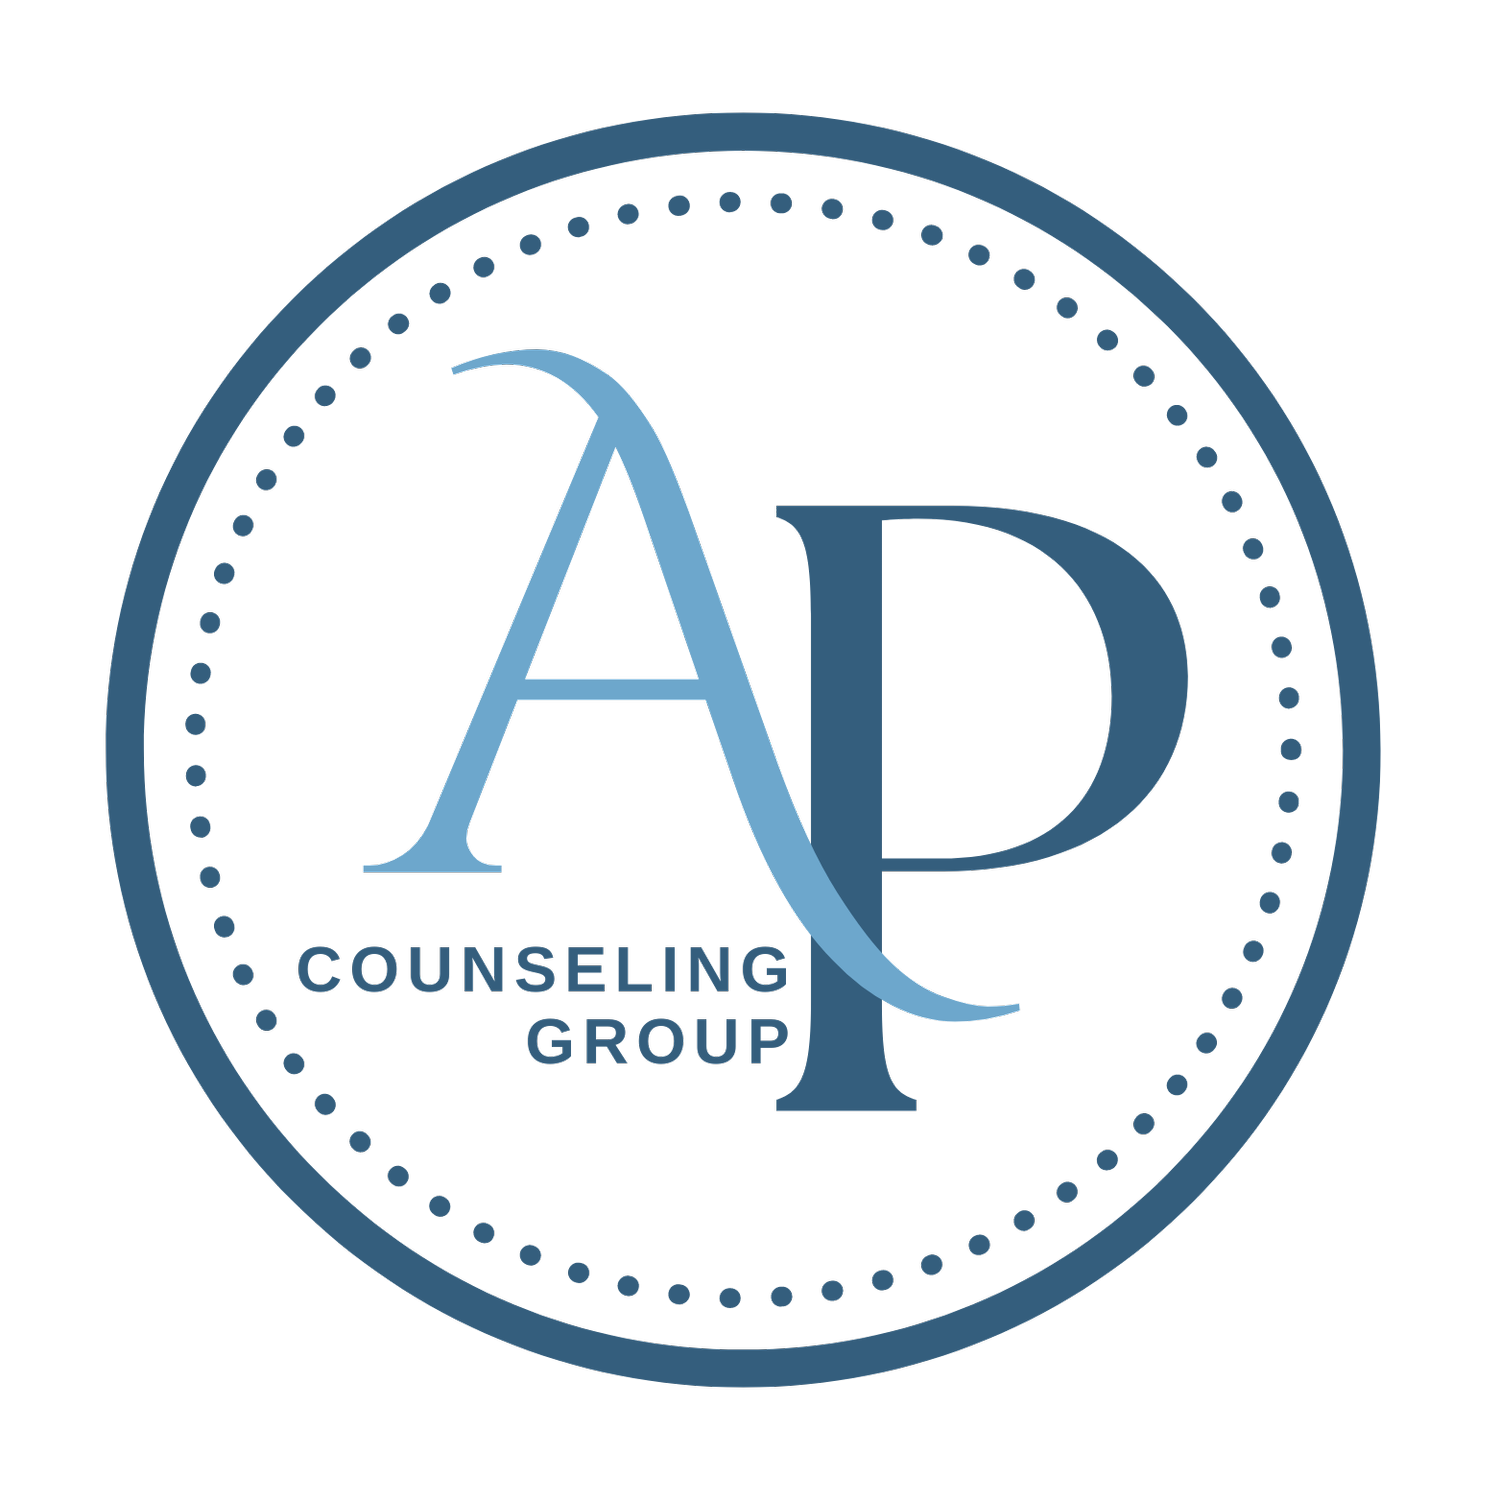 AP Counseling Group